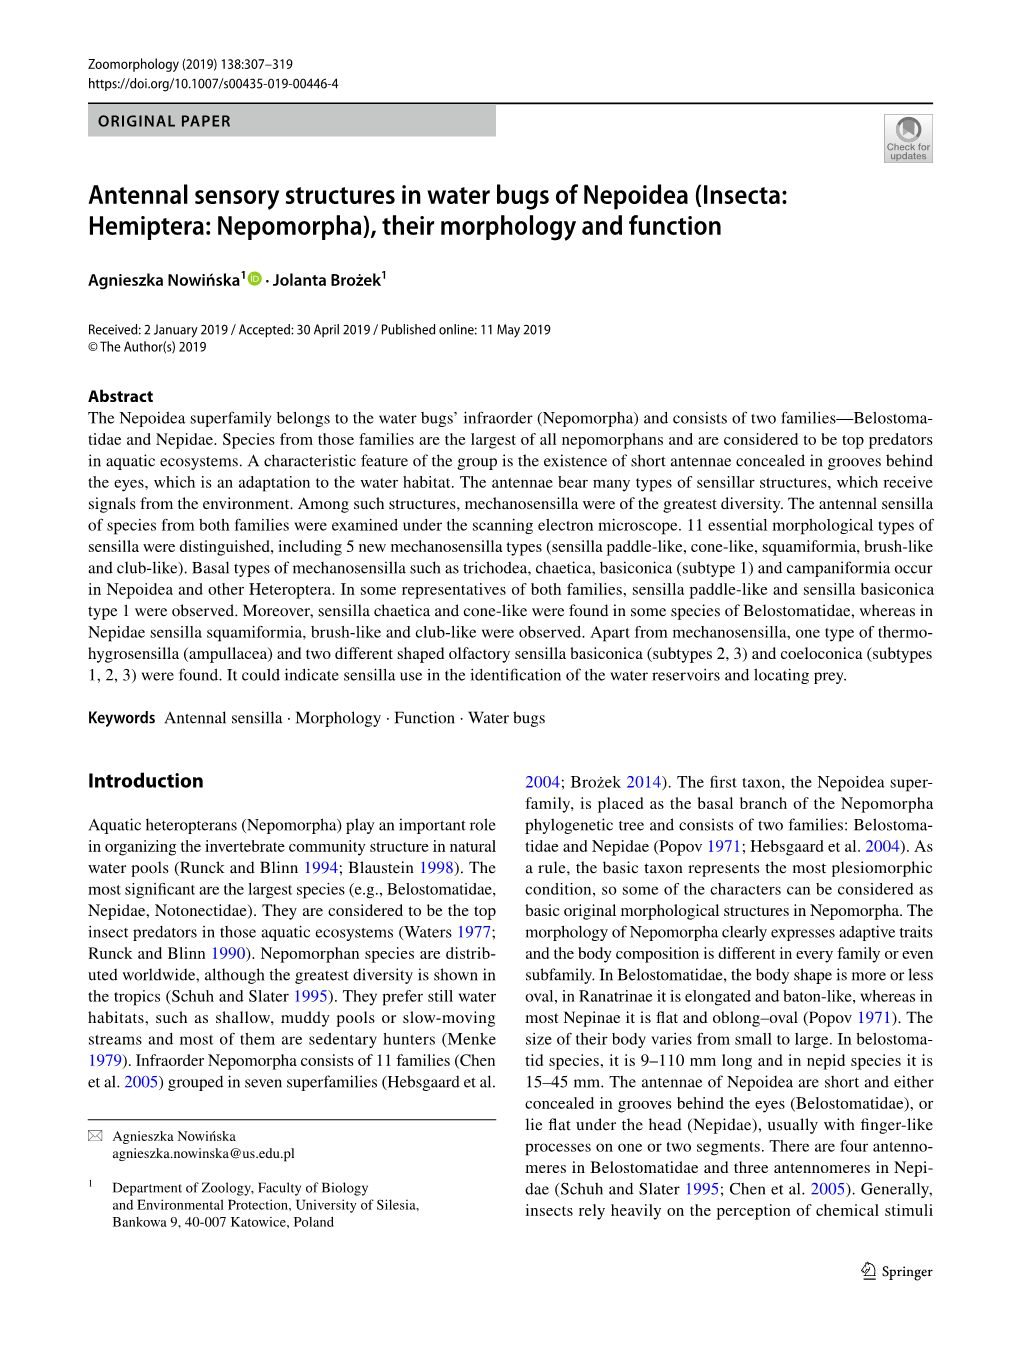 Antennal Sensory Structures in Water Bugs of Nepoidea (Insecta: Hemiptera: Nepomorpha), Their Morphology and Function